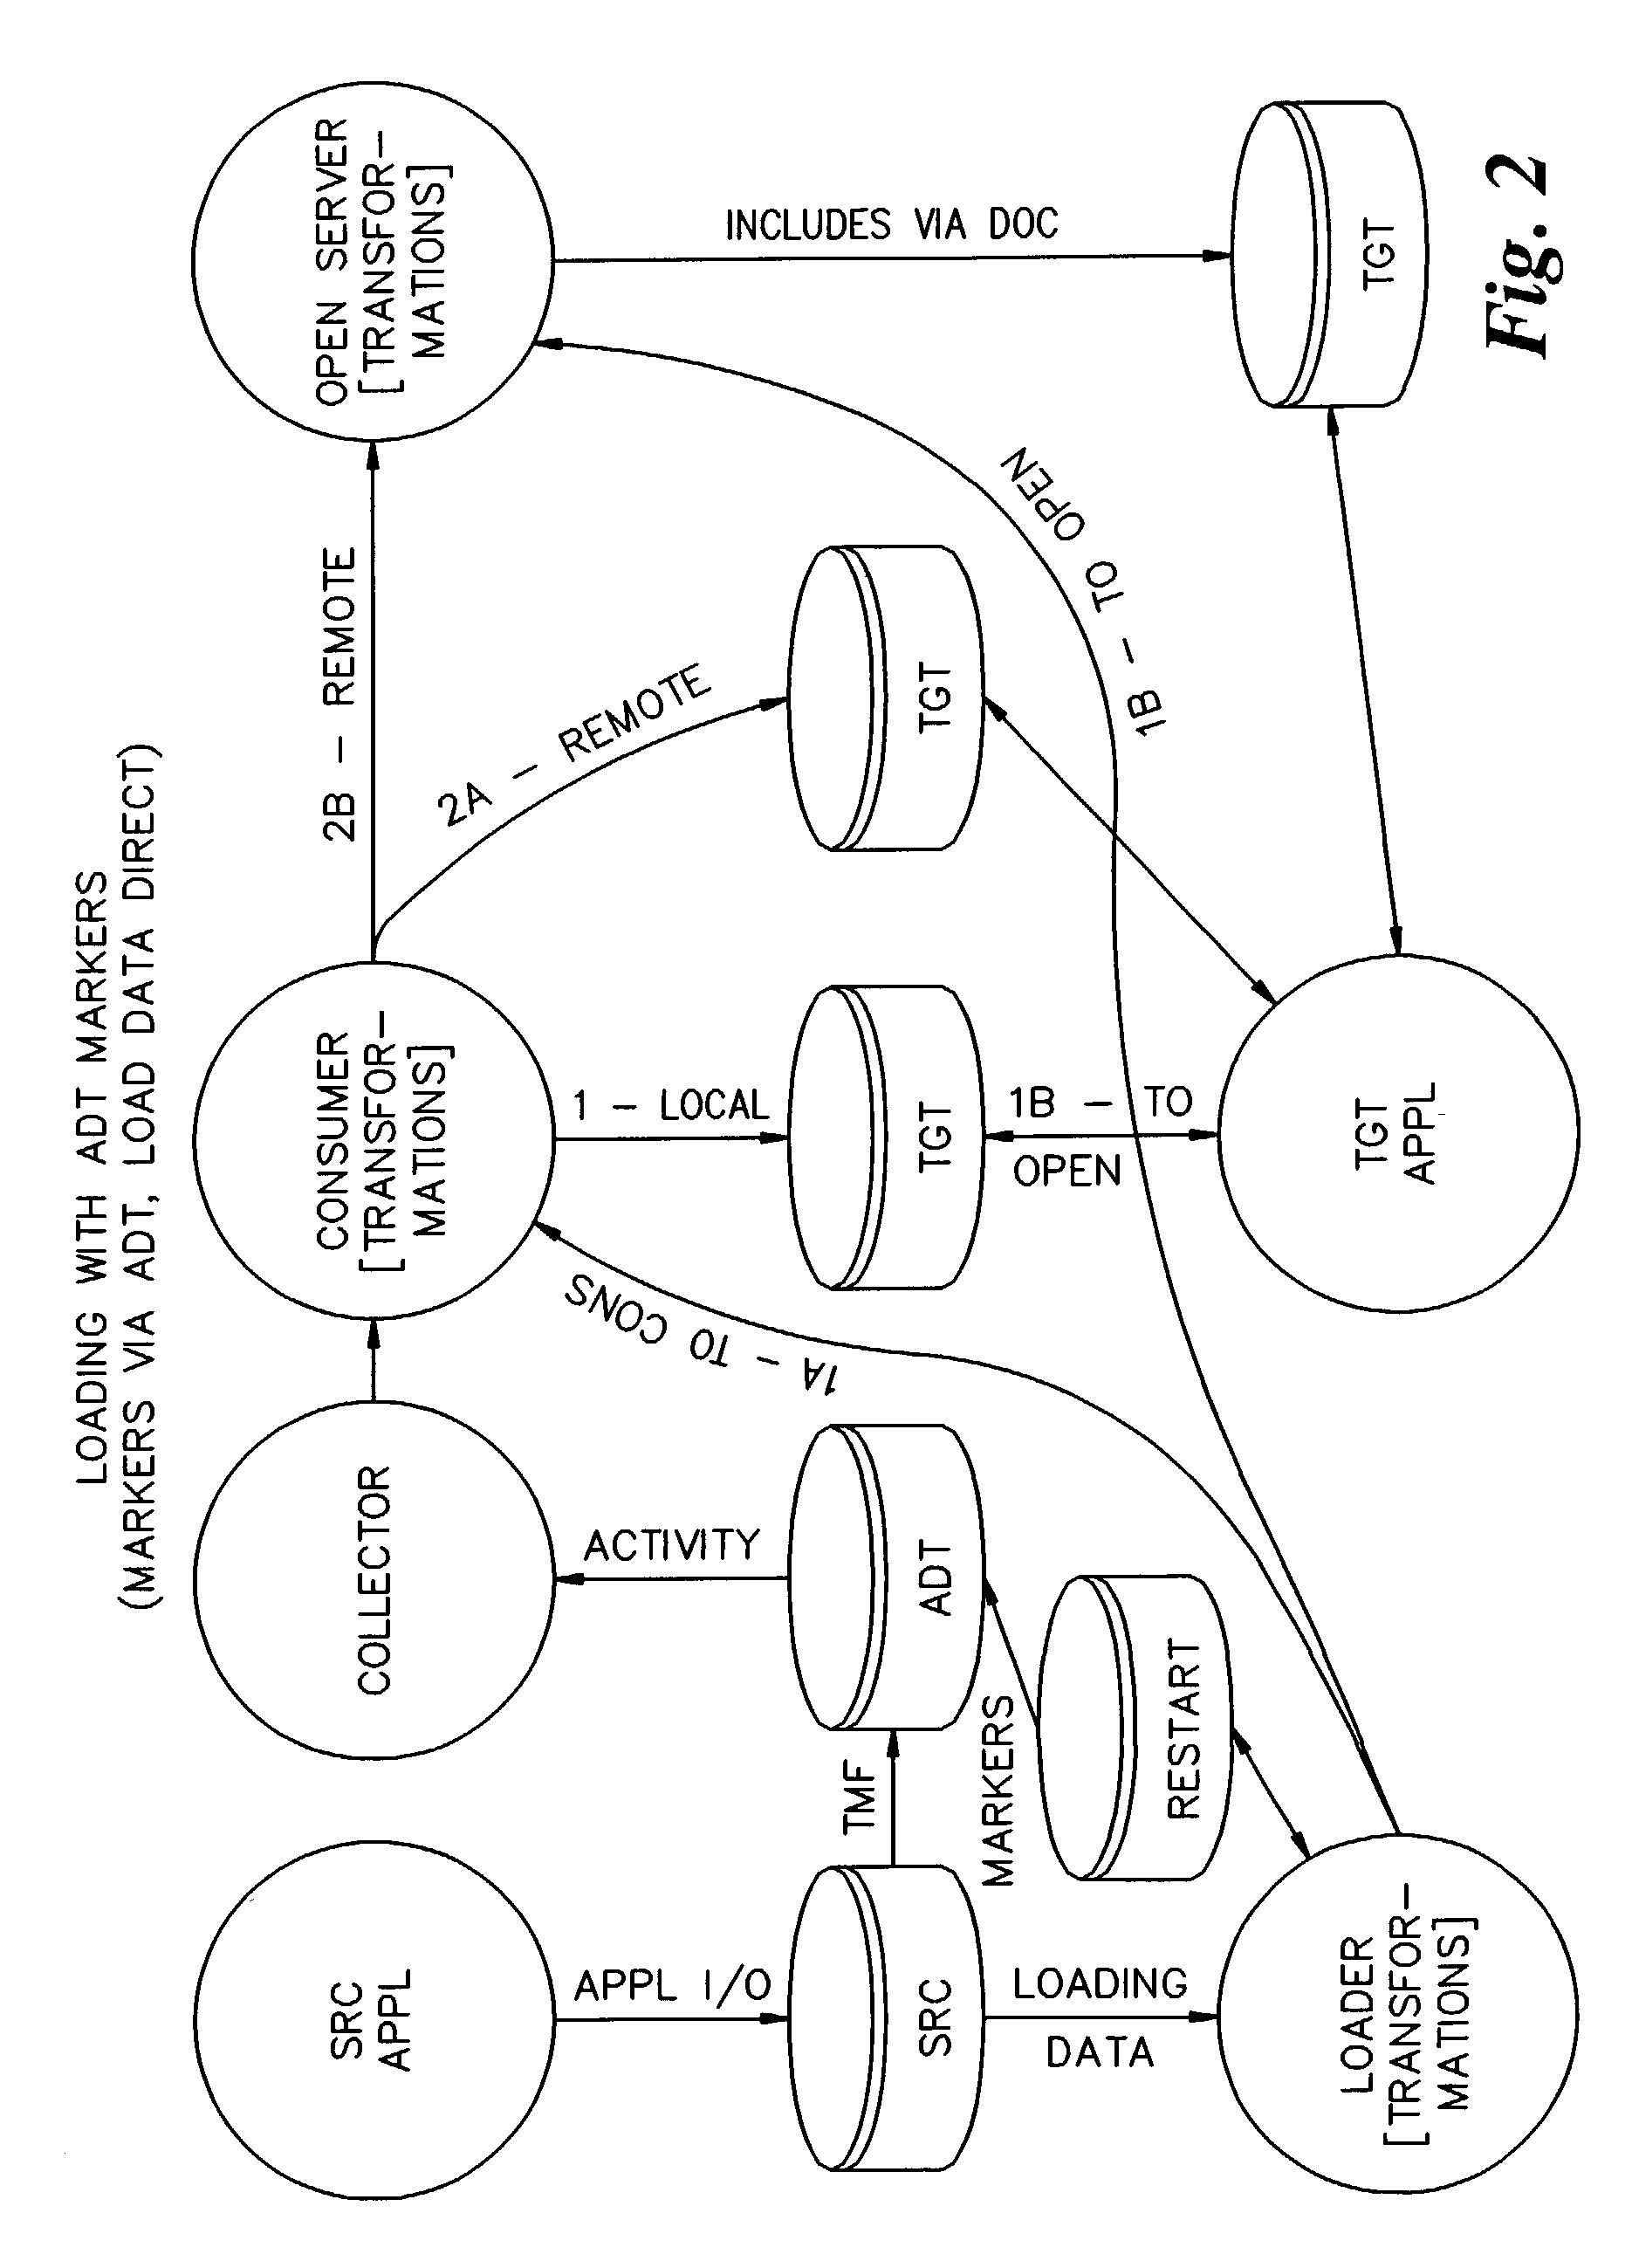 Synchronization of plural databases in a database replication system